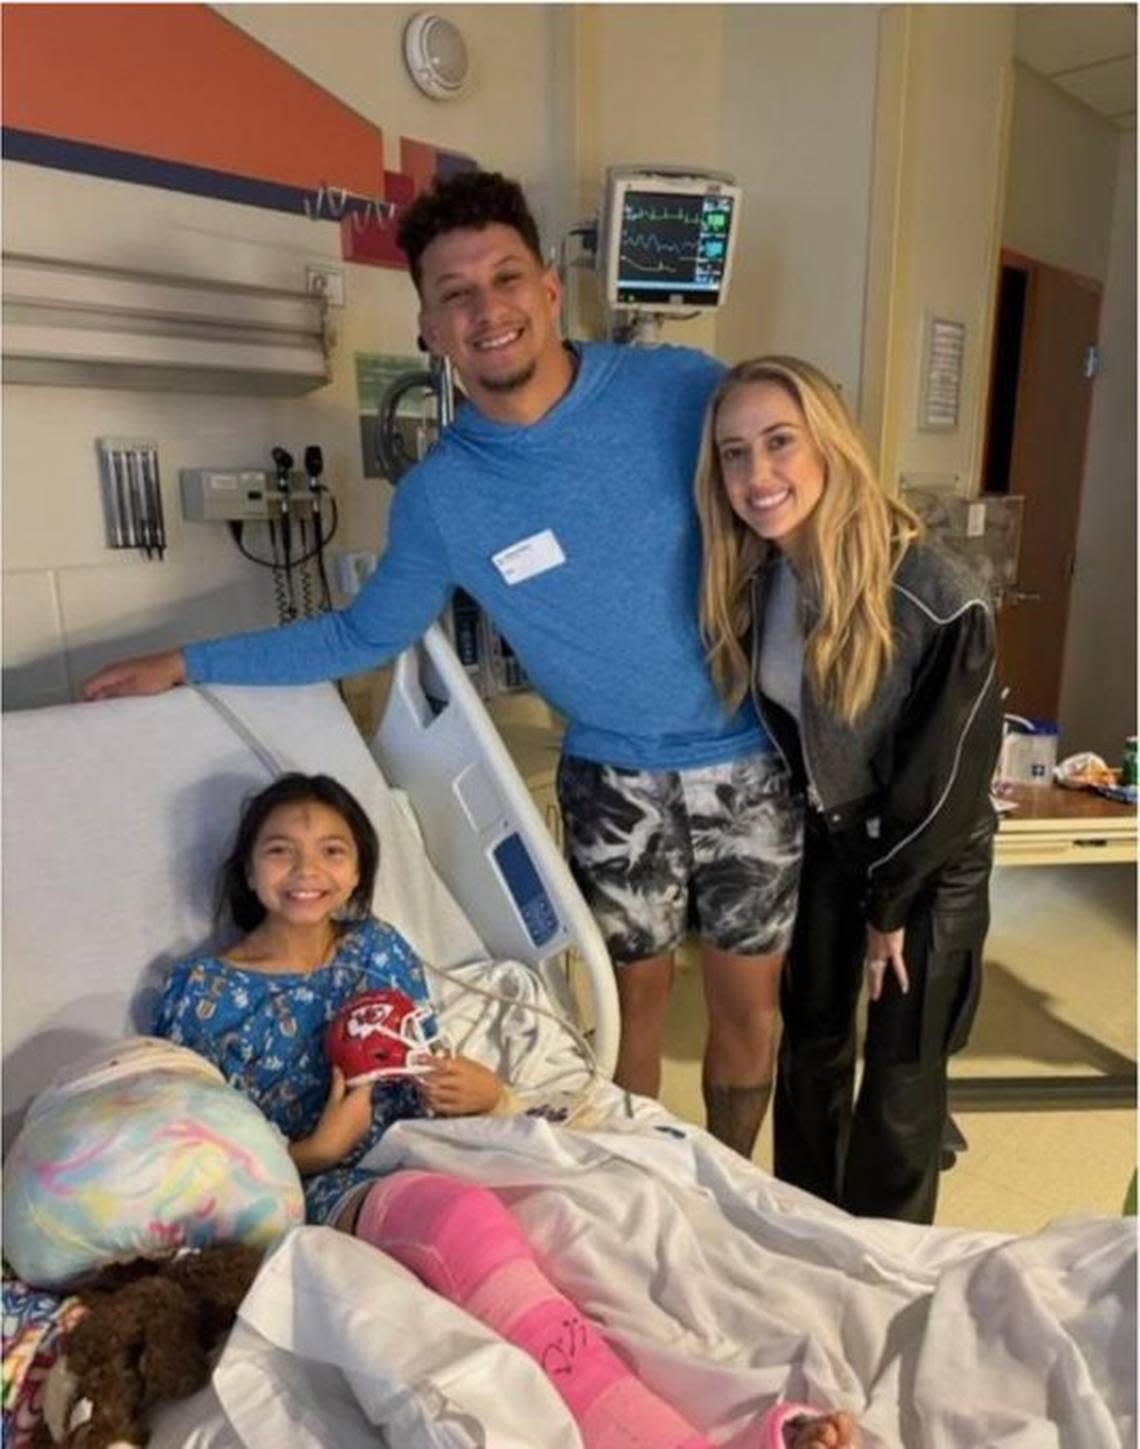 Patrick and Brittany Mahomes visited a young shooting victim in the hospital. Courtesy of the Reyes family